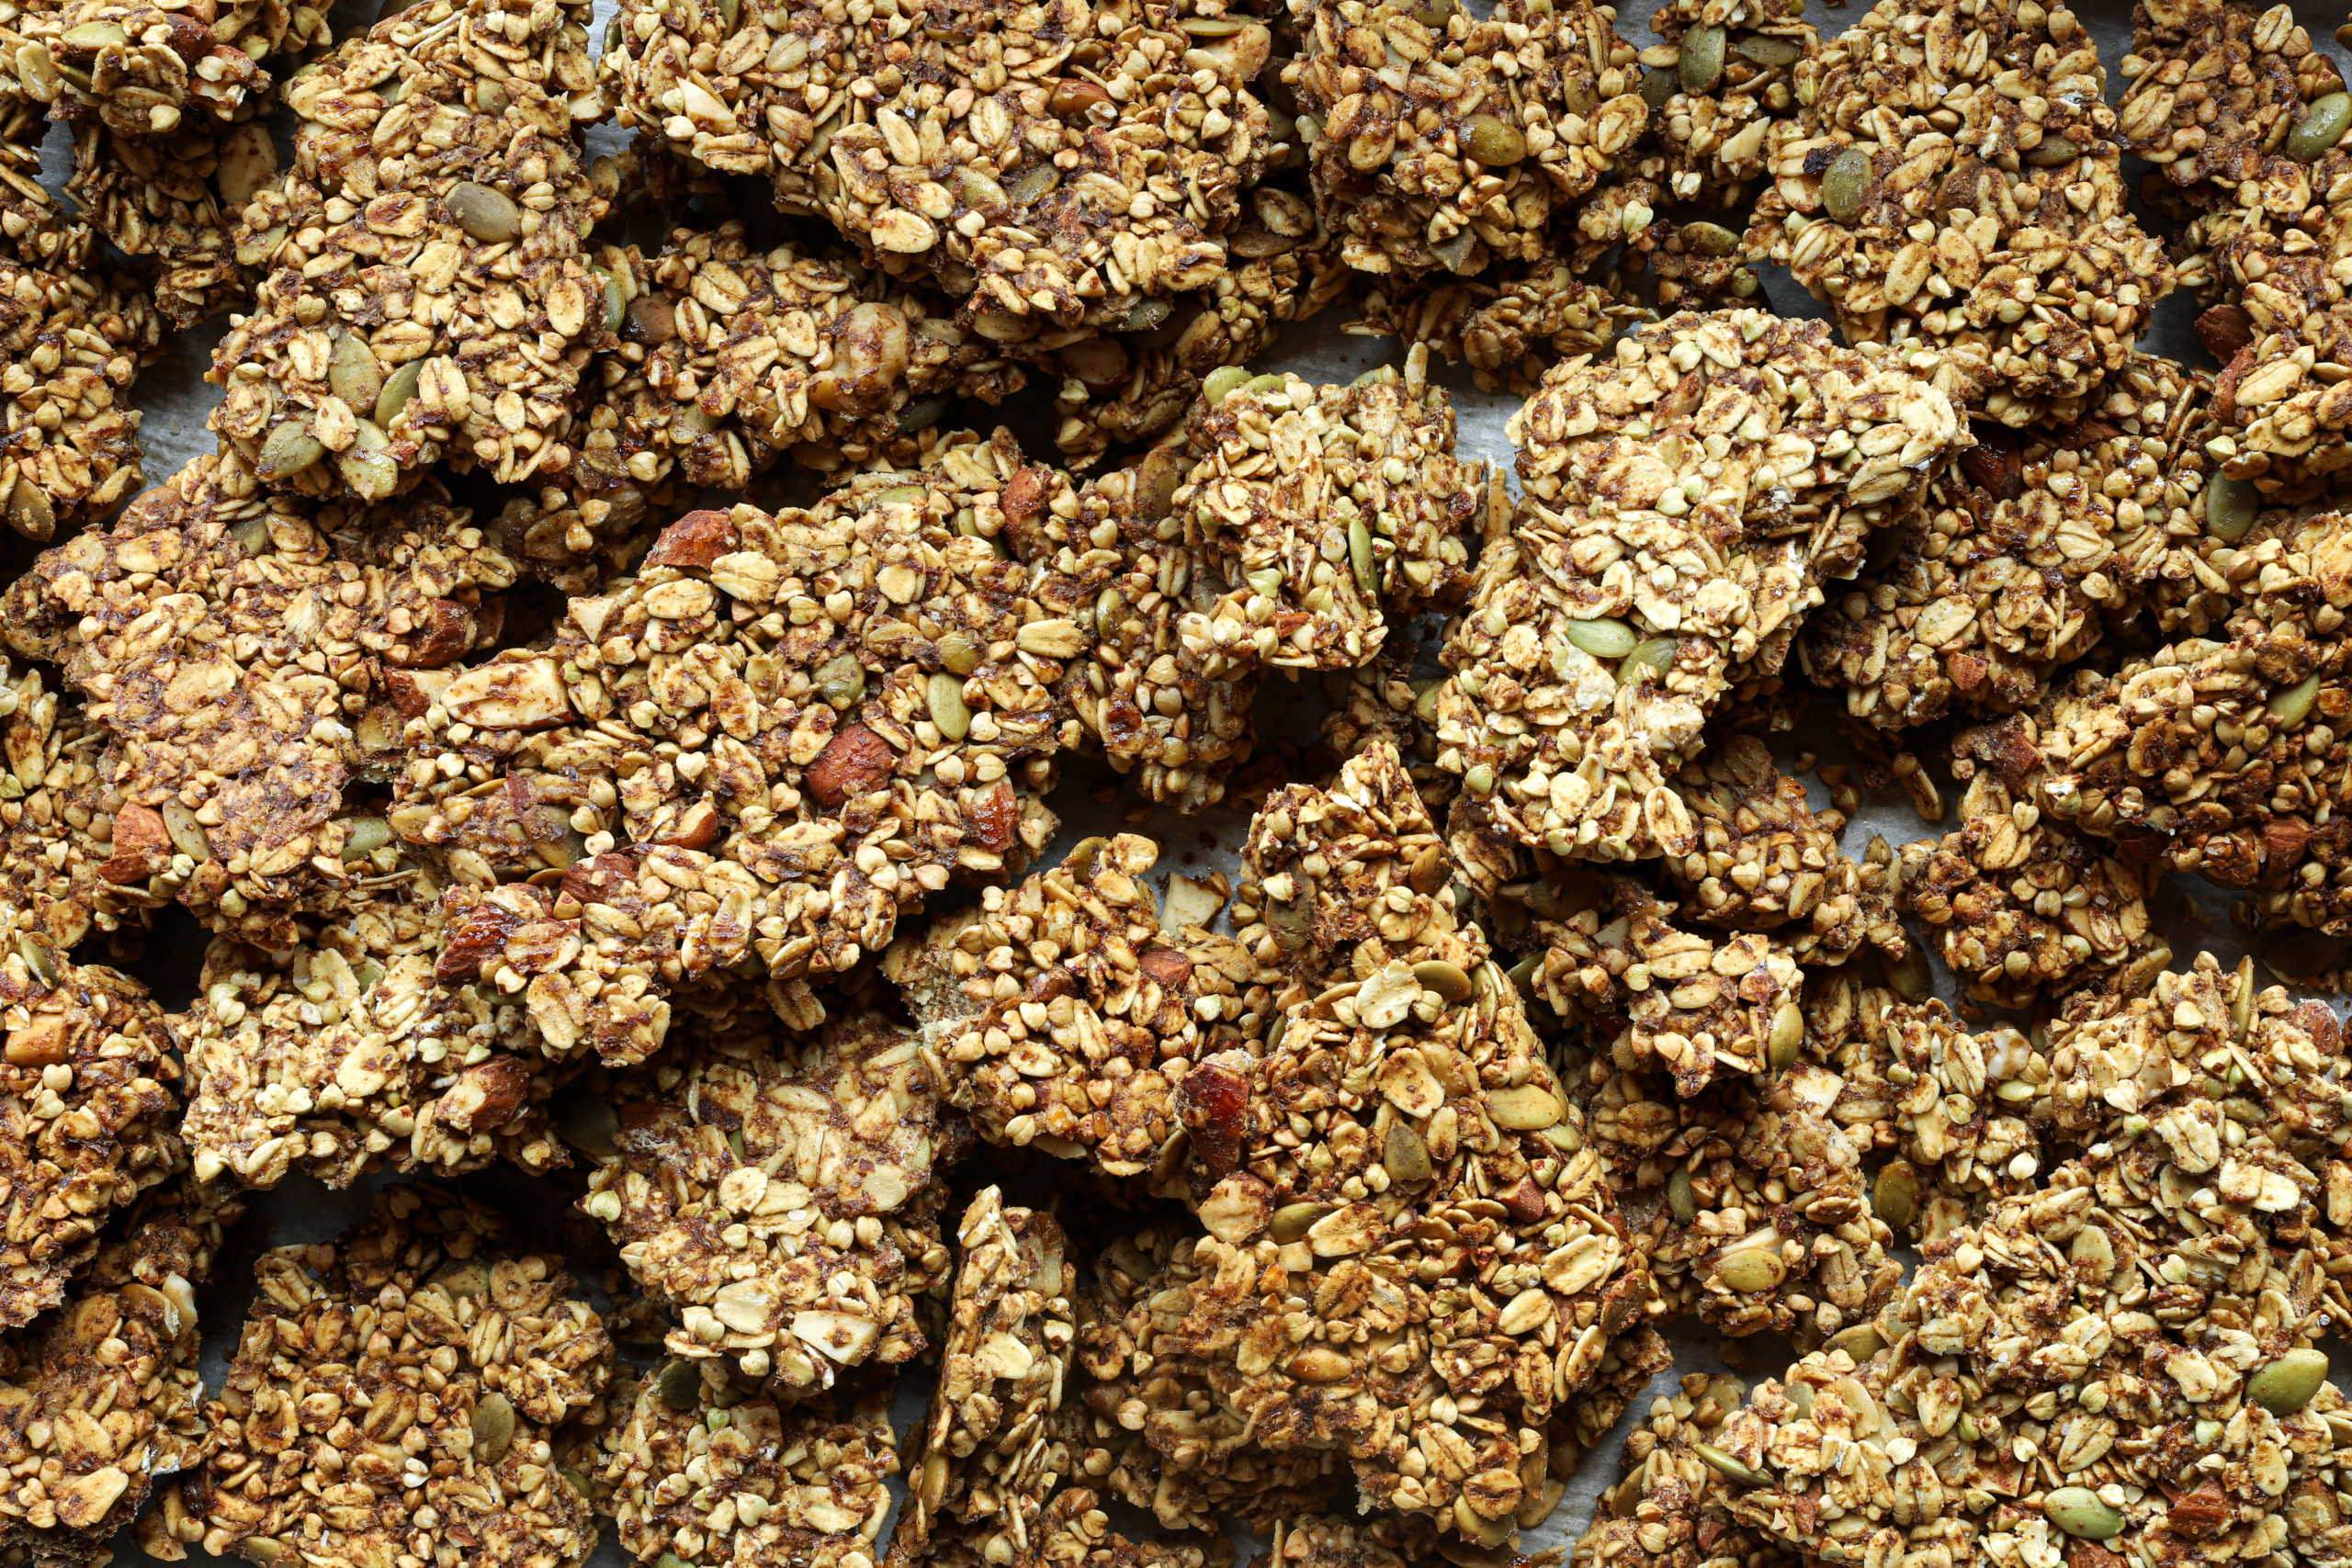 Huge vegan granola chunks made without oil or refined sugar